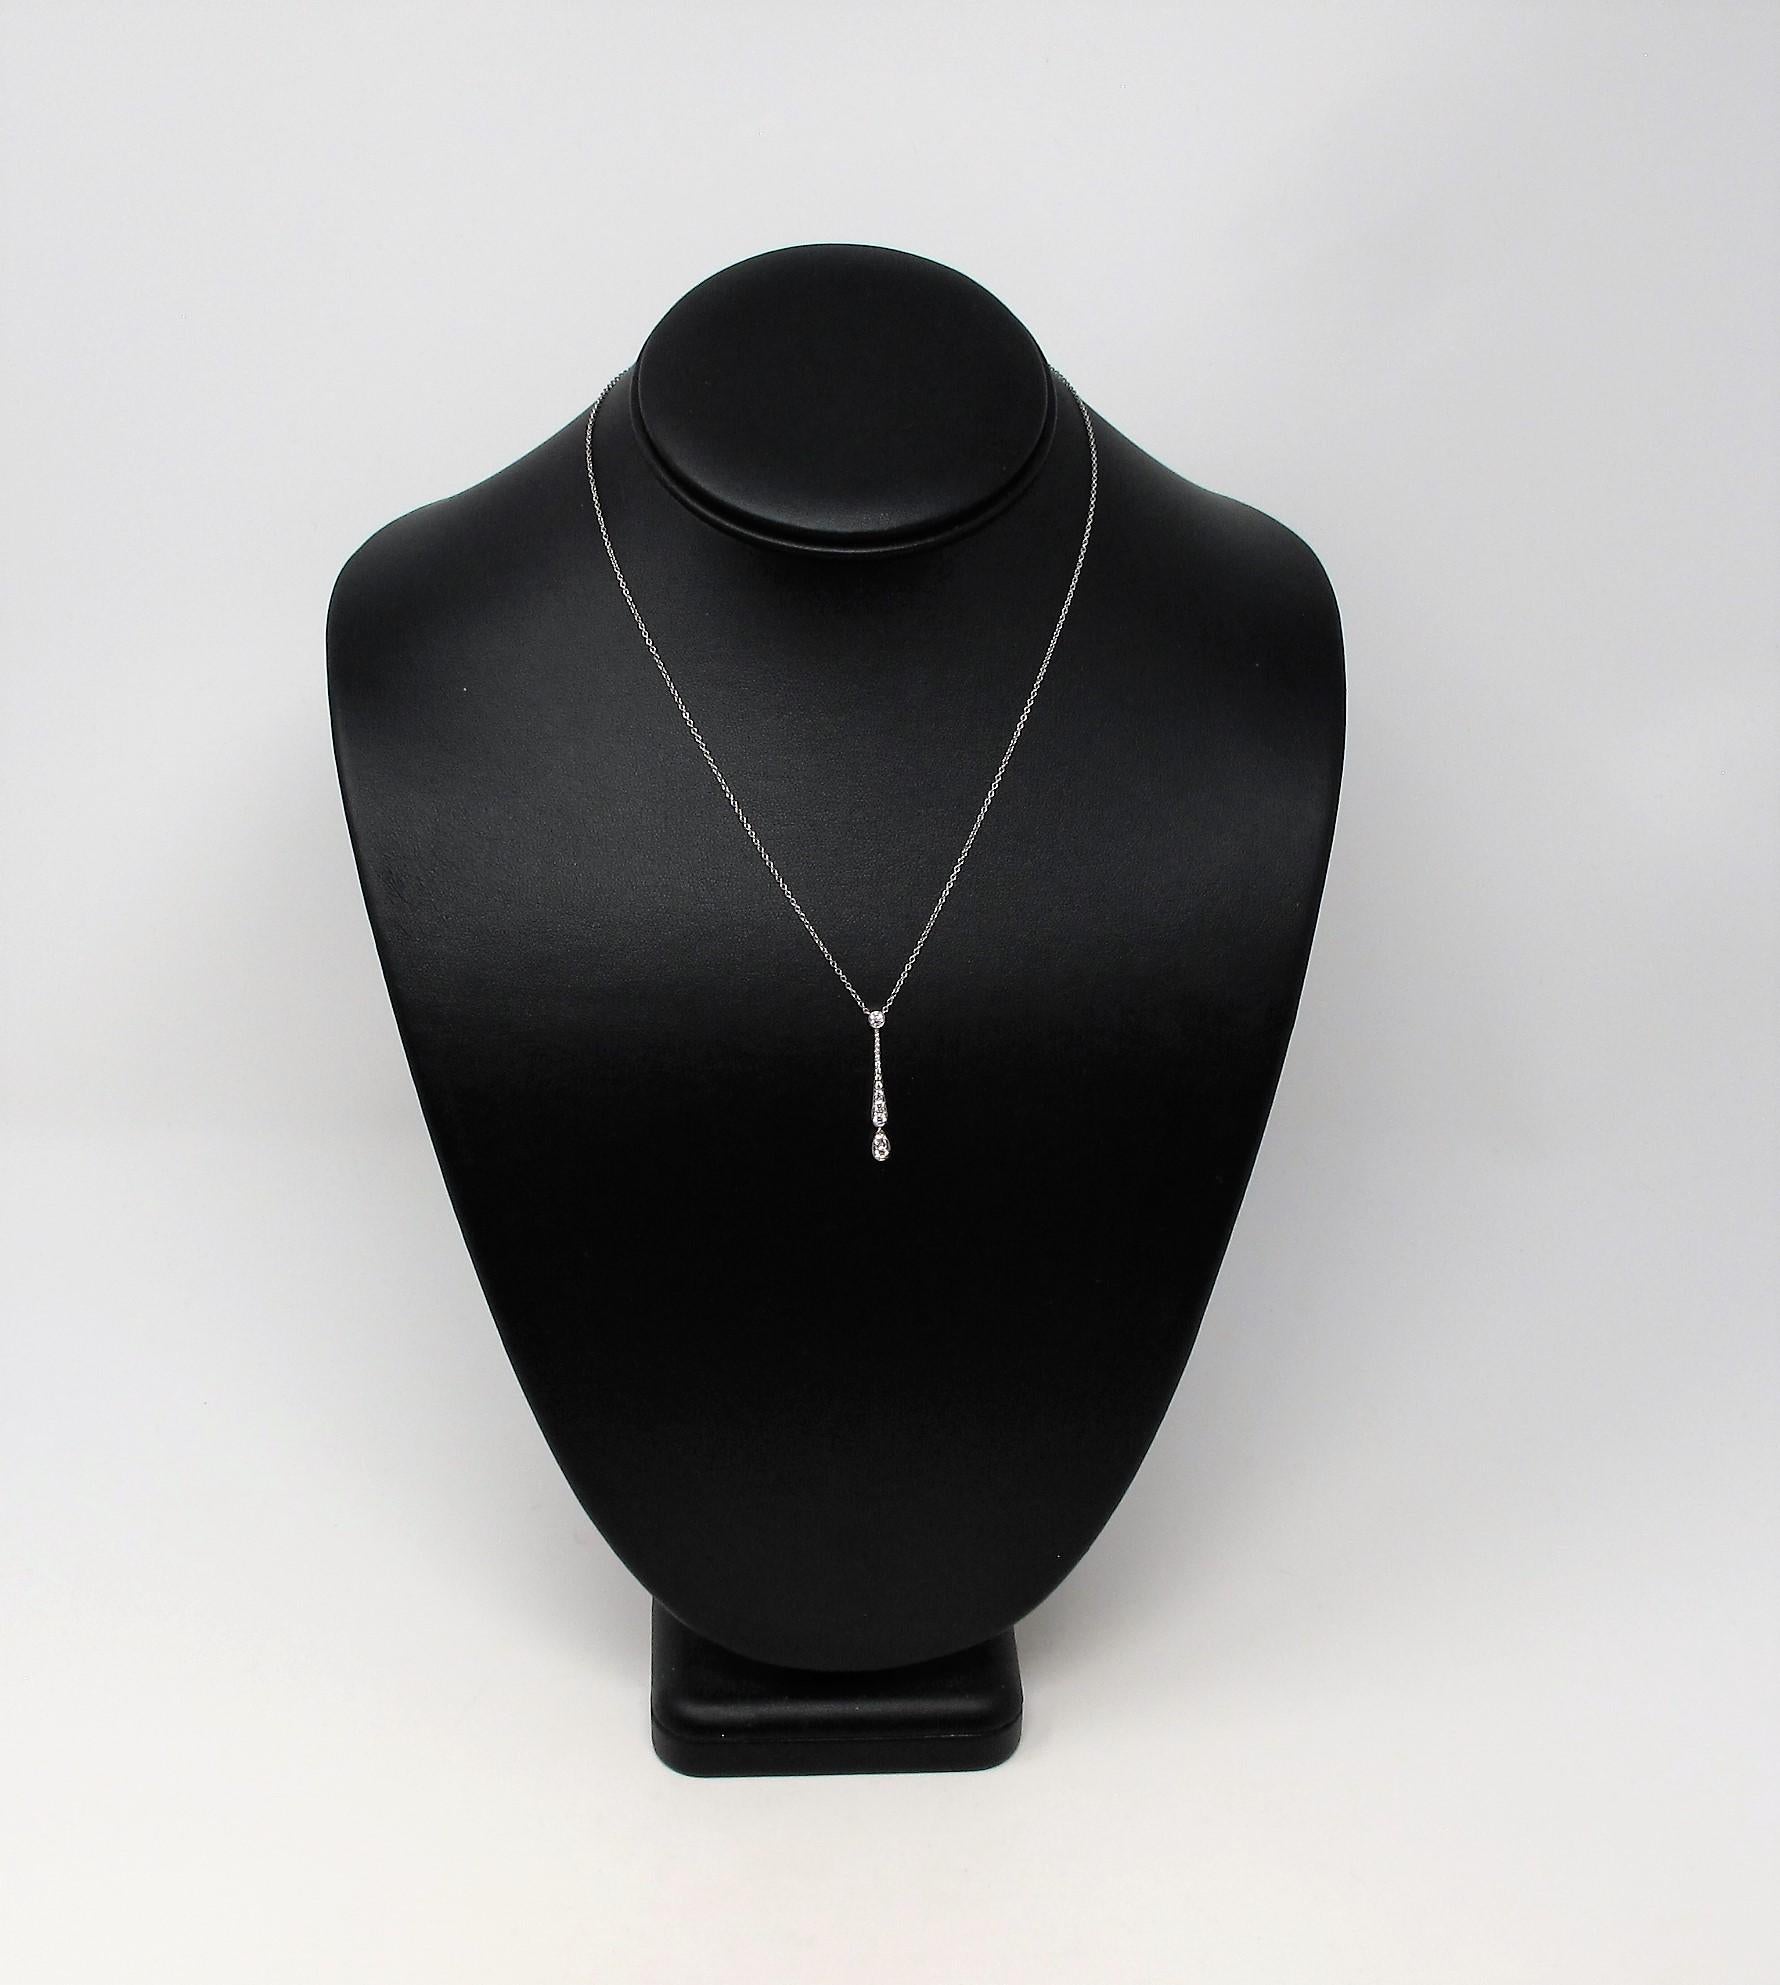 The diamond Jazz pendant necklace from Tiffany & Co. is stunningly simple, yet impressively elegant. This is one of those necklaces that you will never want to take off!  Featuring a delicate platinum chain and a graduated drop of natural round